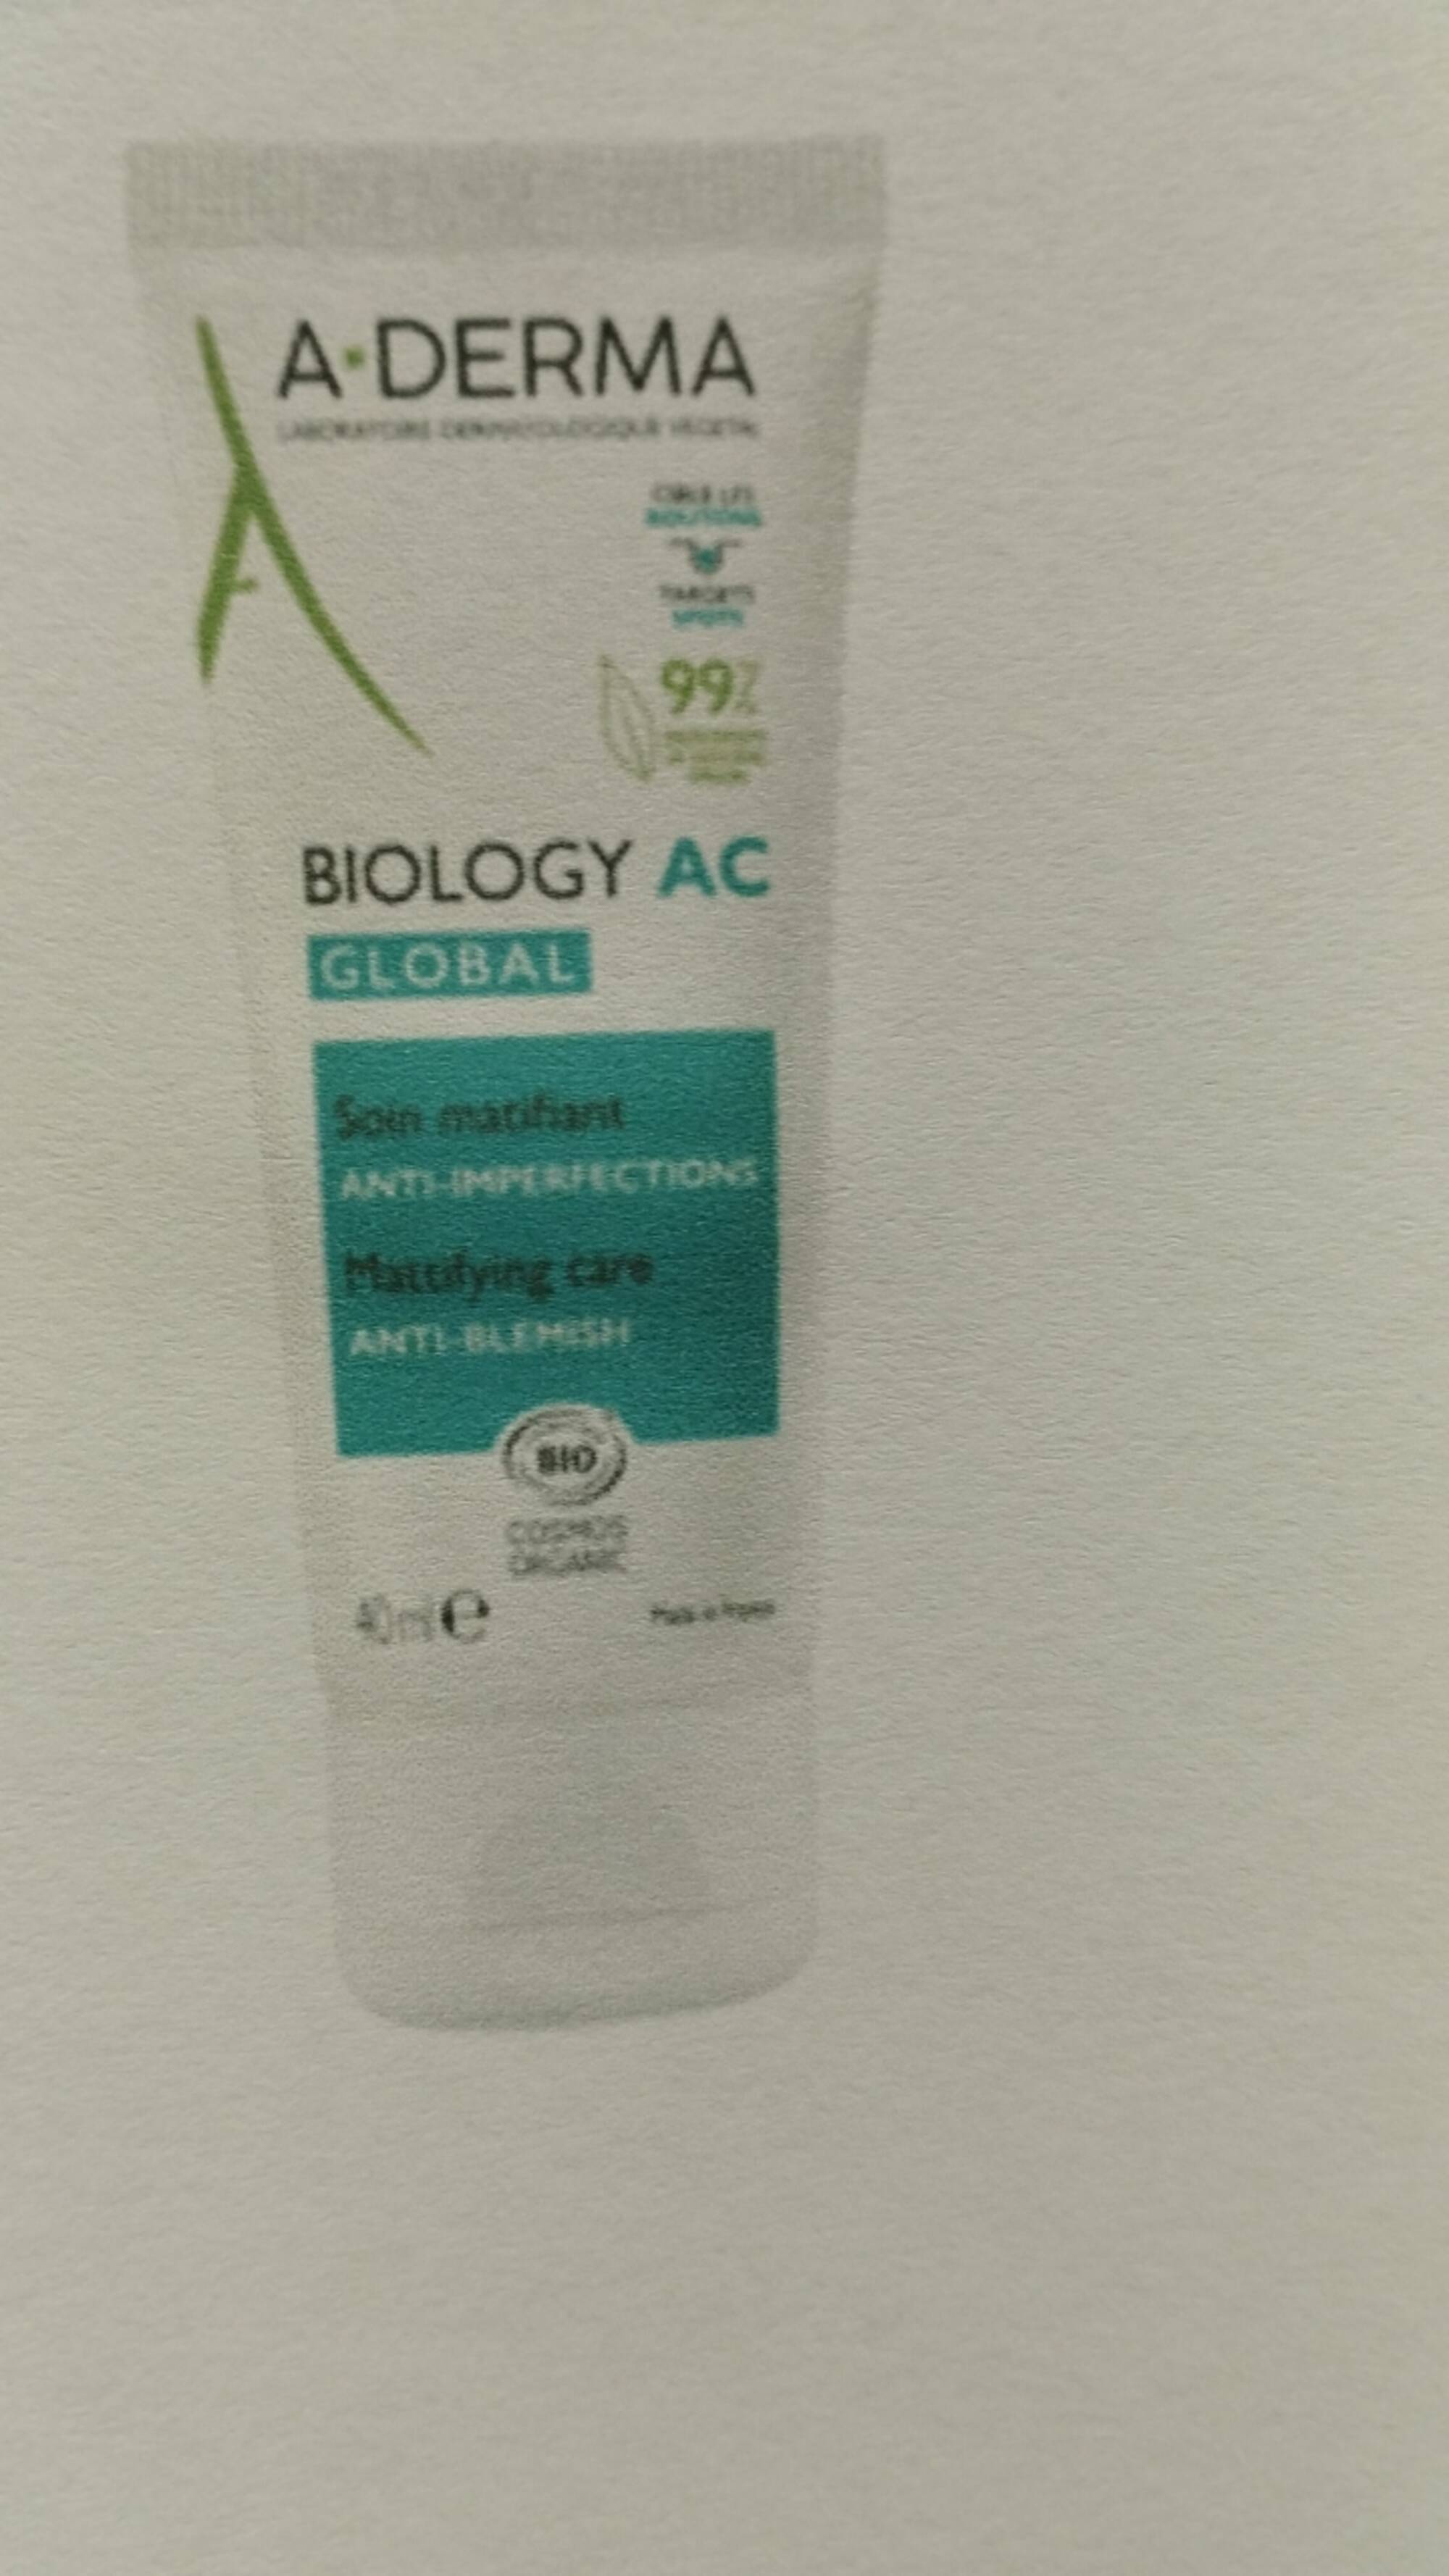 A-DERMA - Biology AC global - Soin matifiant anti-imperfections